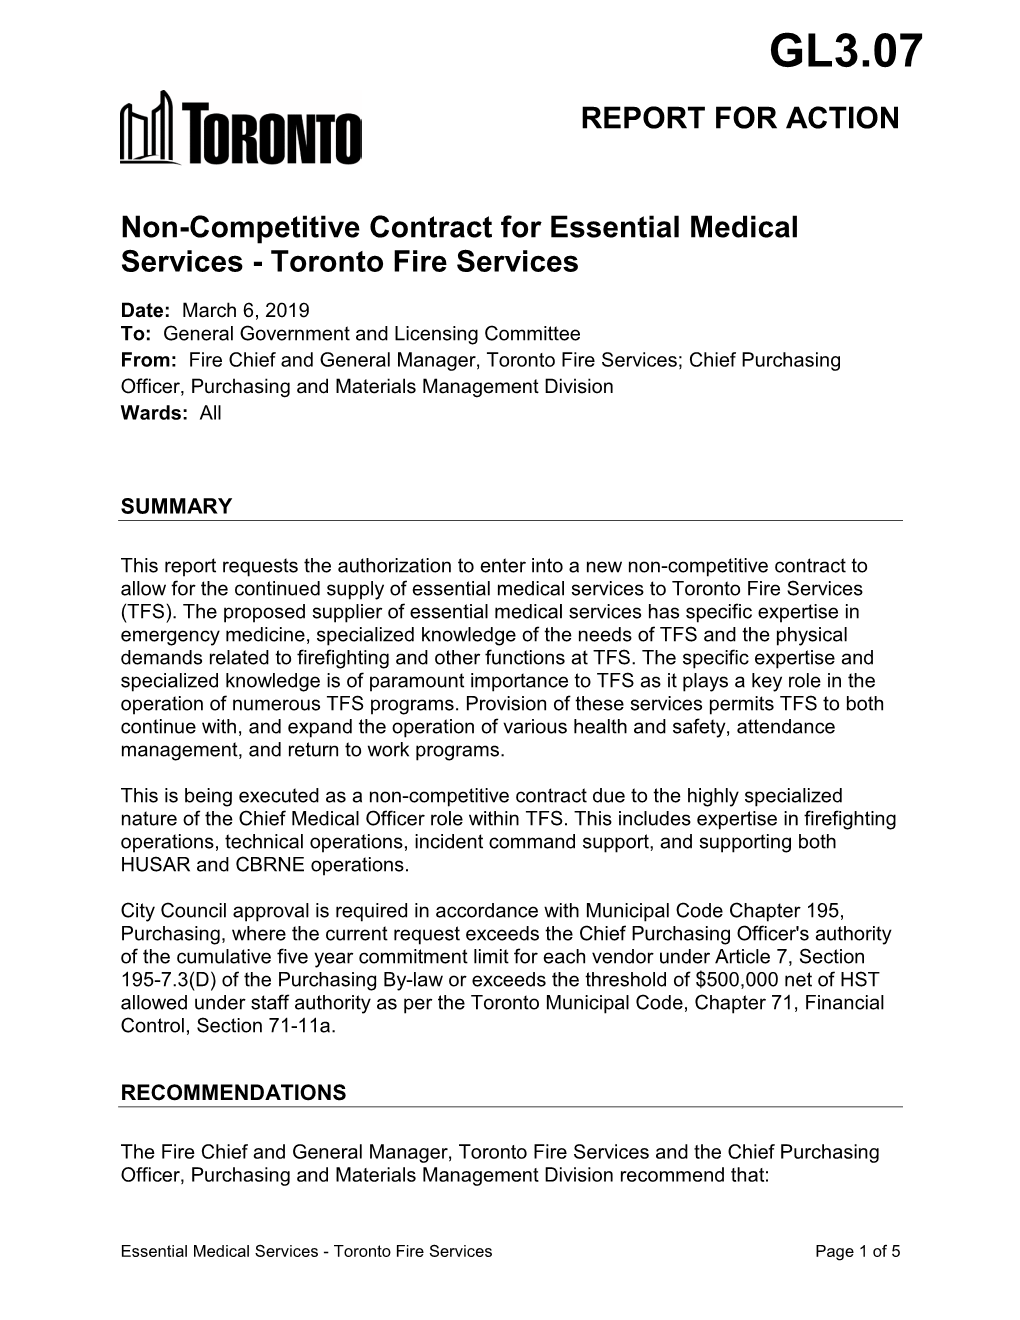 Non-Competitive Contract for Essential Medical Services - Toronto Fire Services